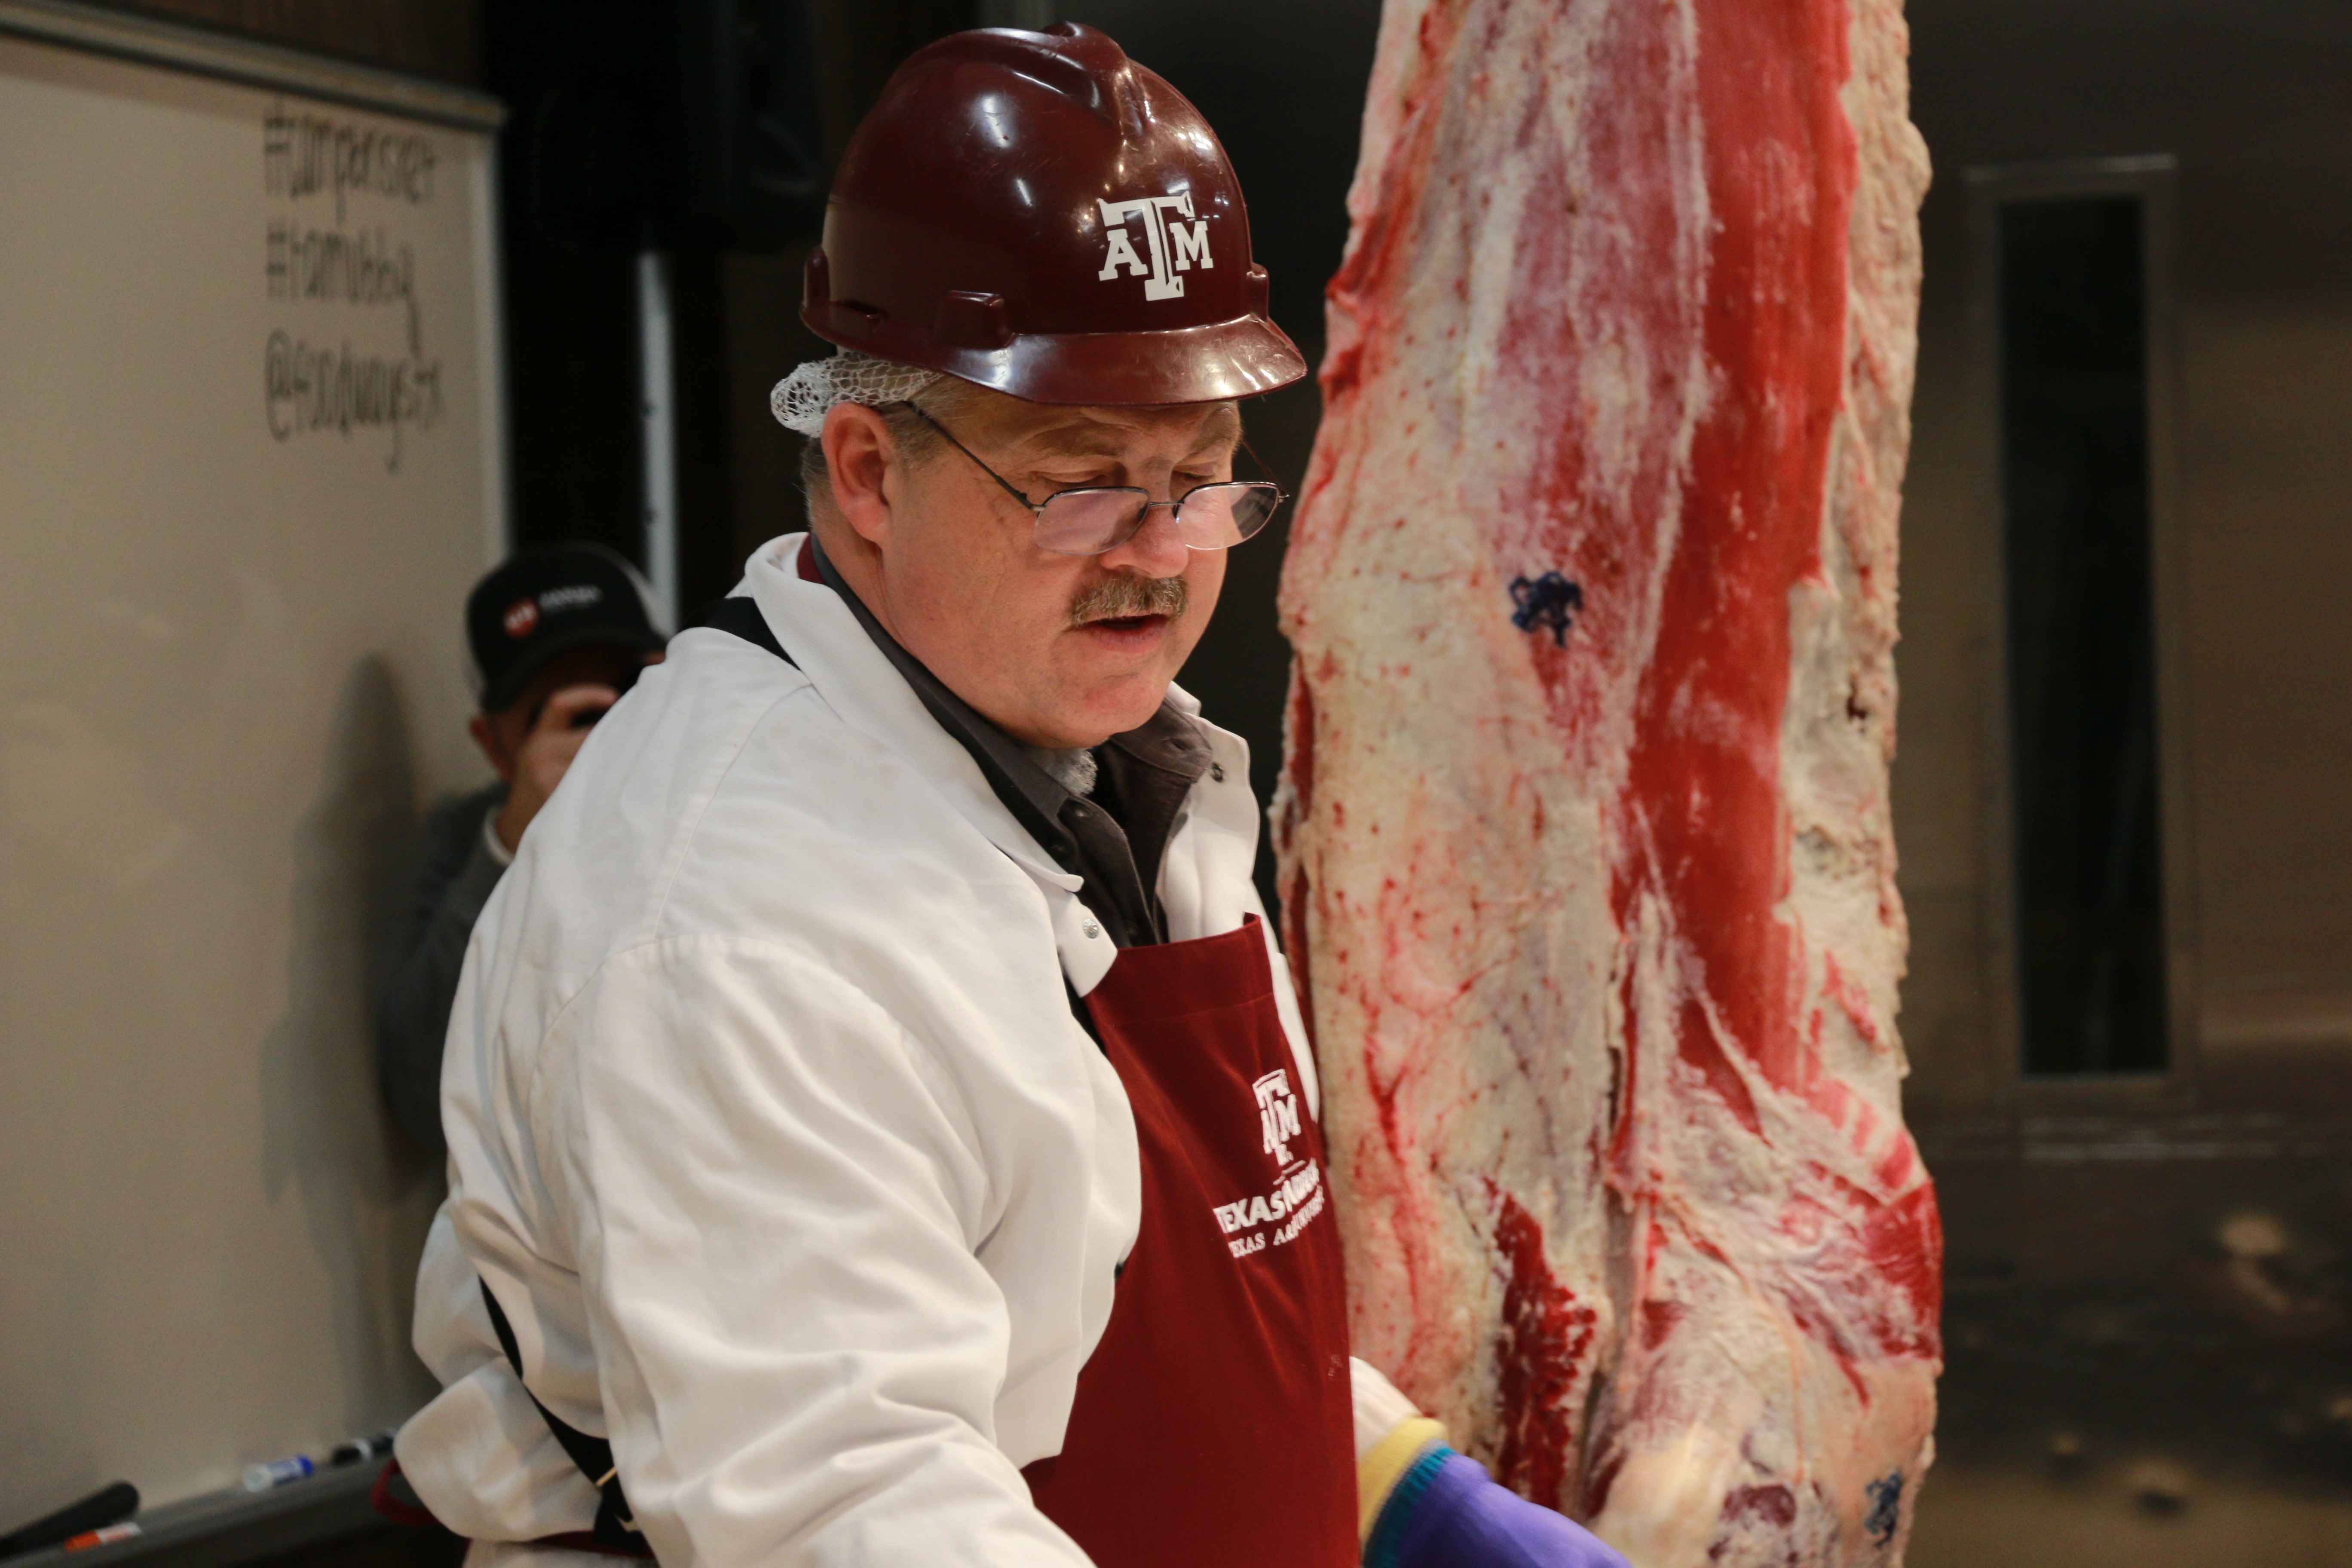 Davey Griffin discussing the anatomy of a brisket